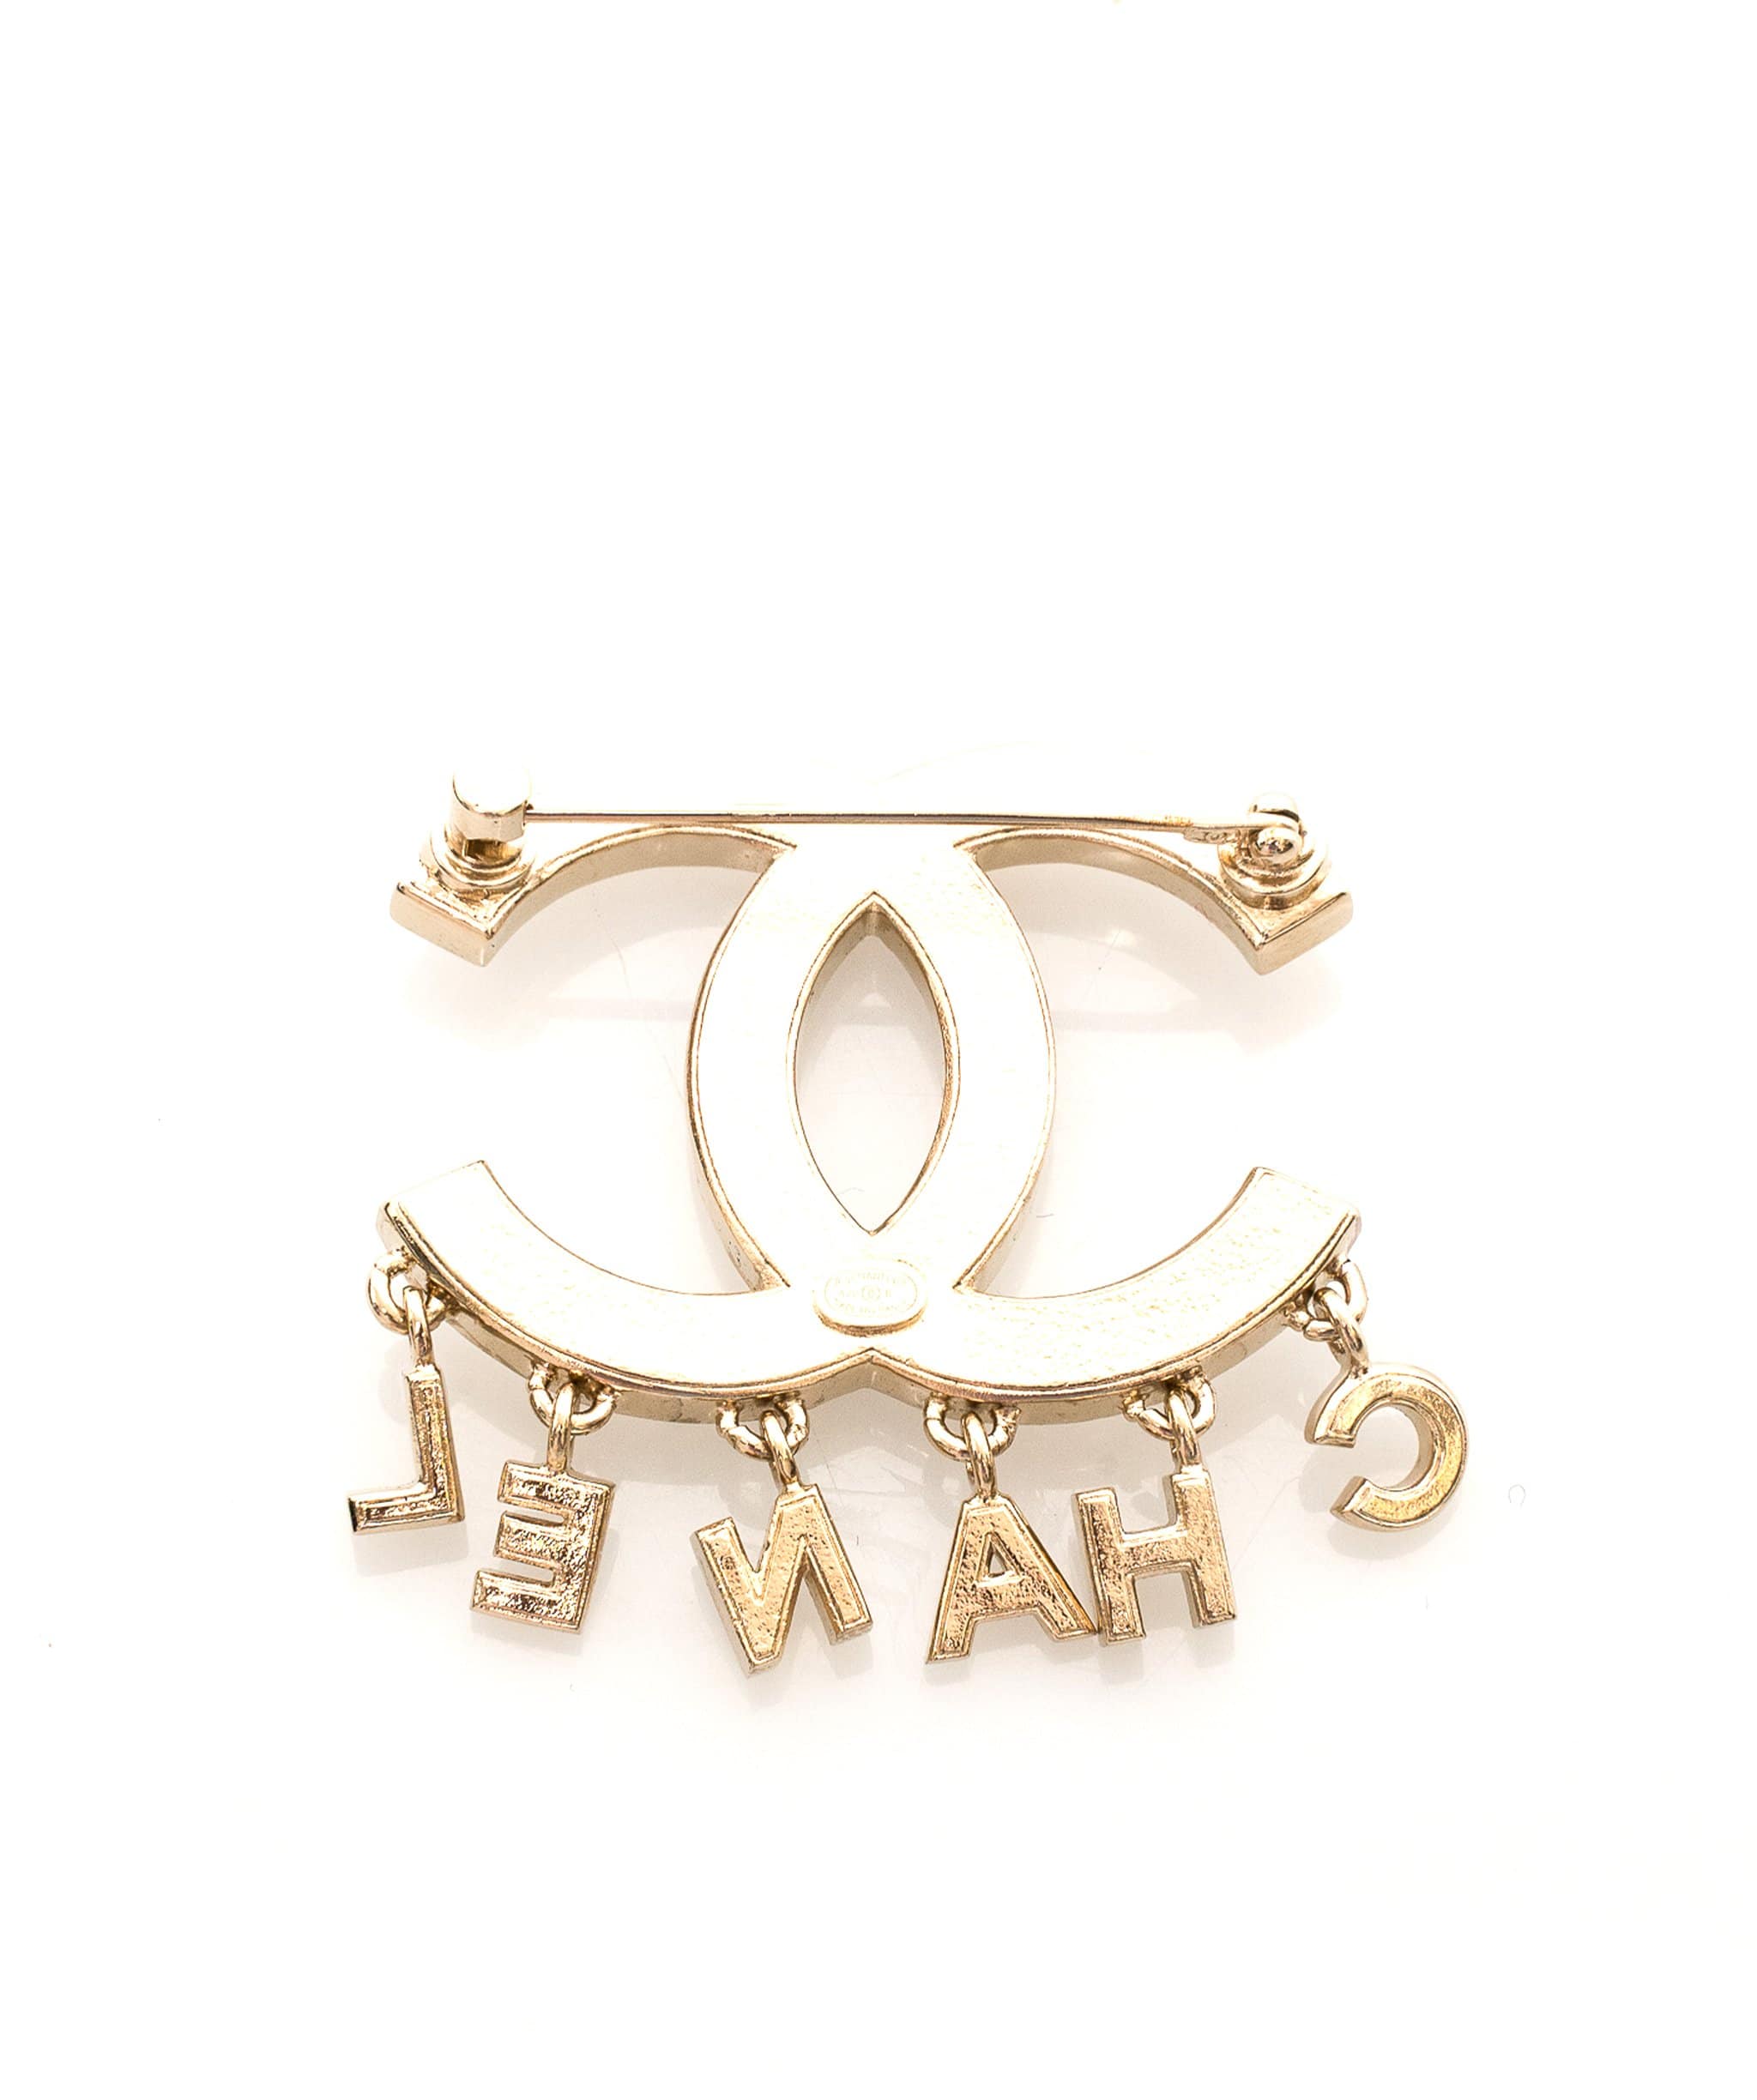 Chanel Chanel CC Pearl Brooch with Chanel Initials Drop MW1230